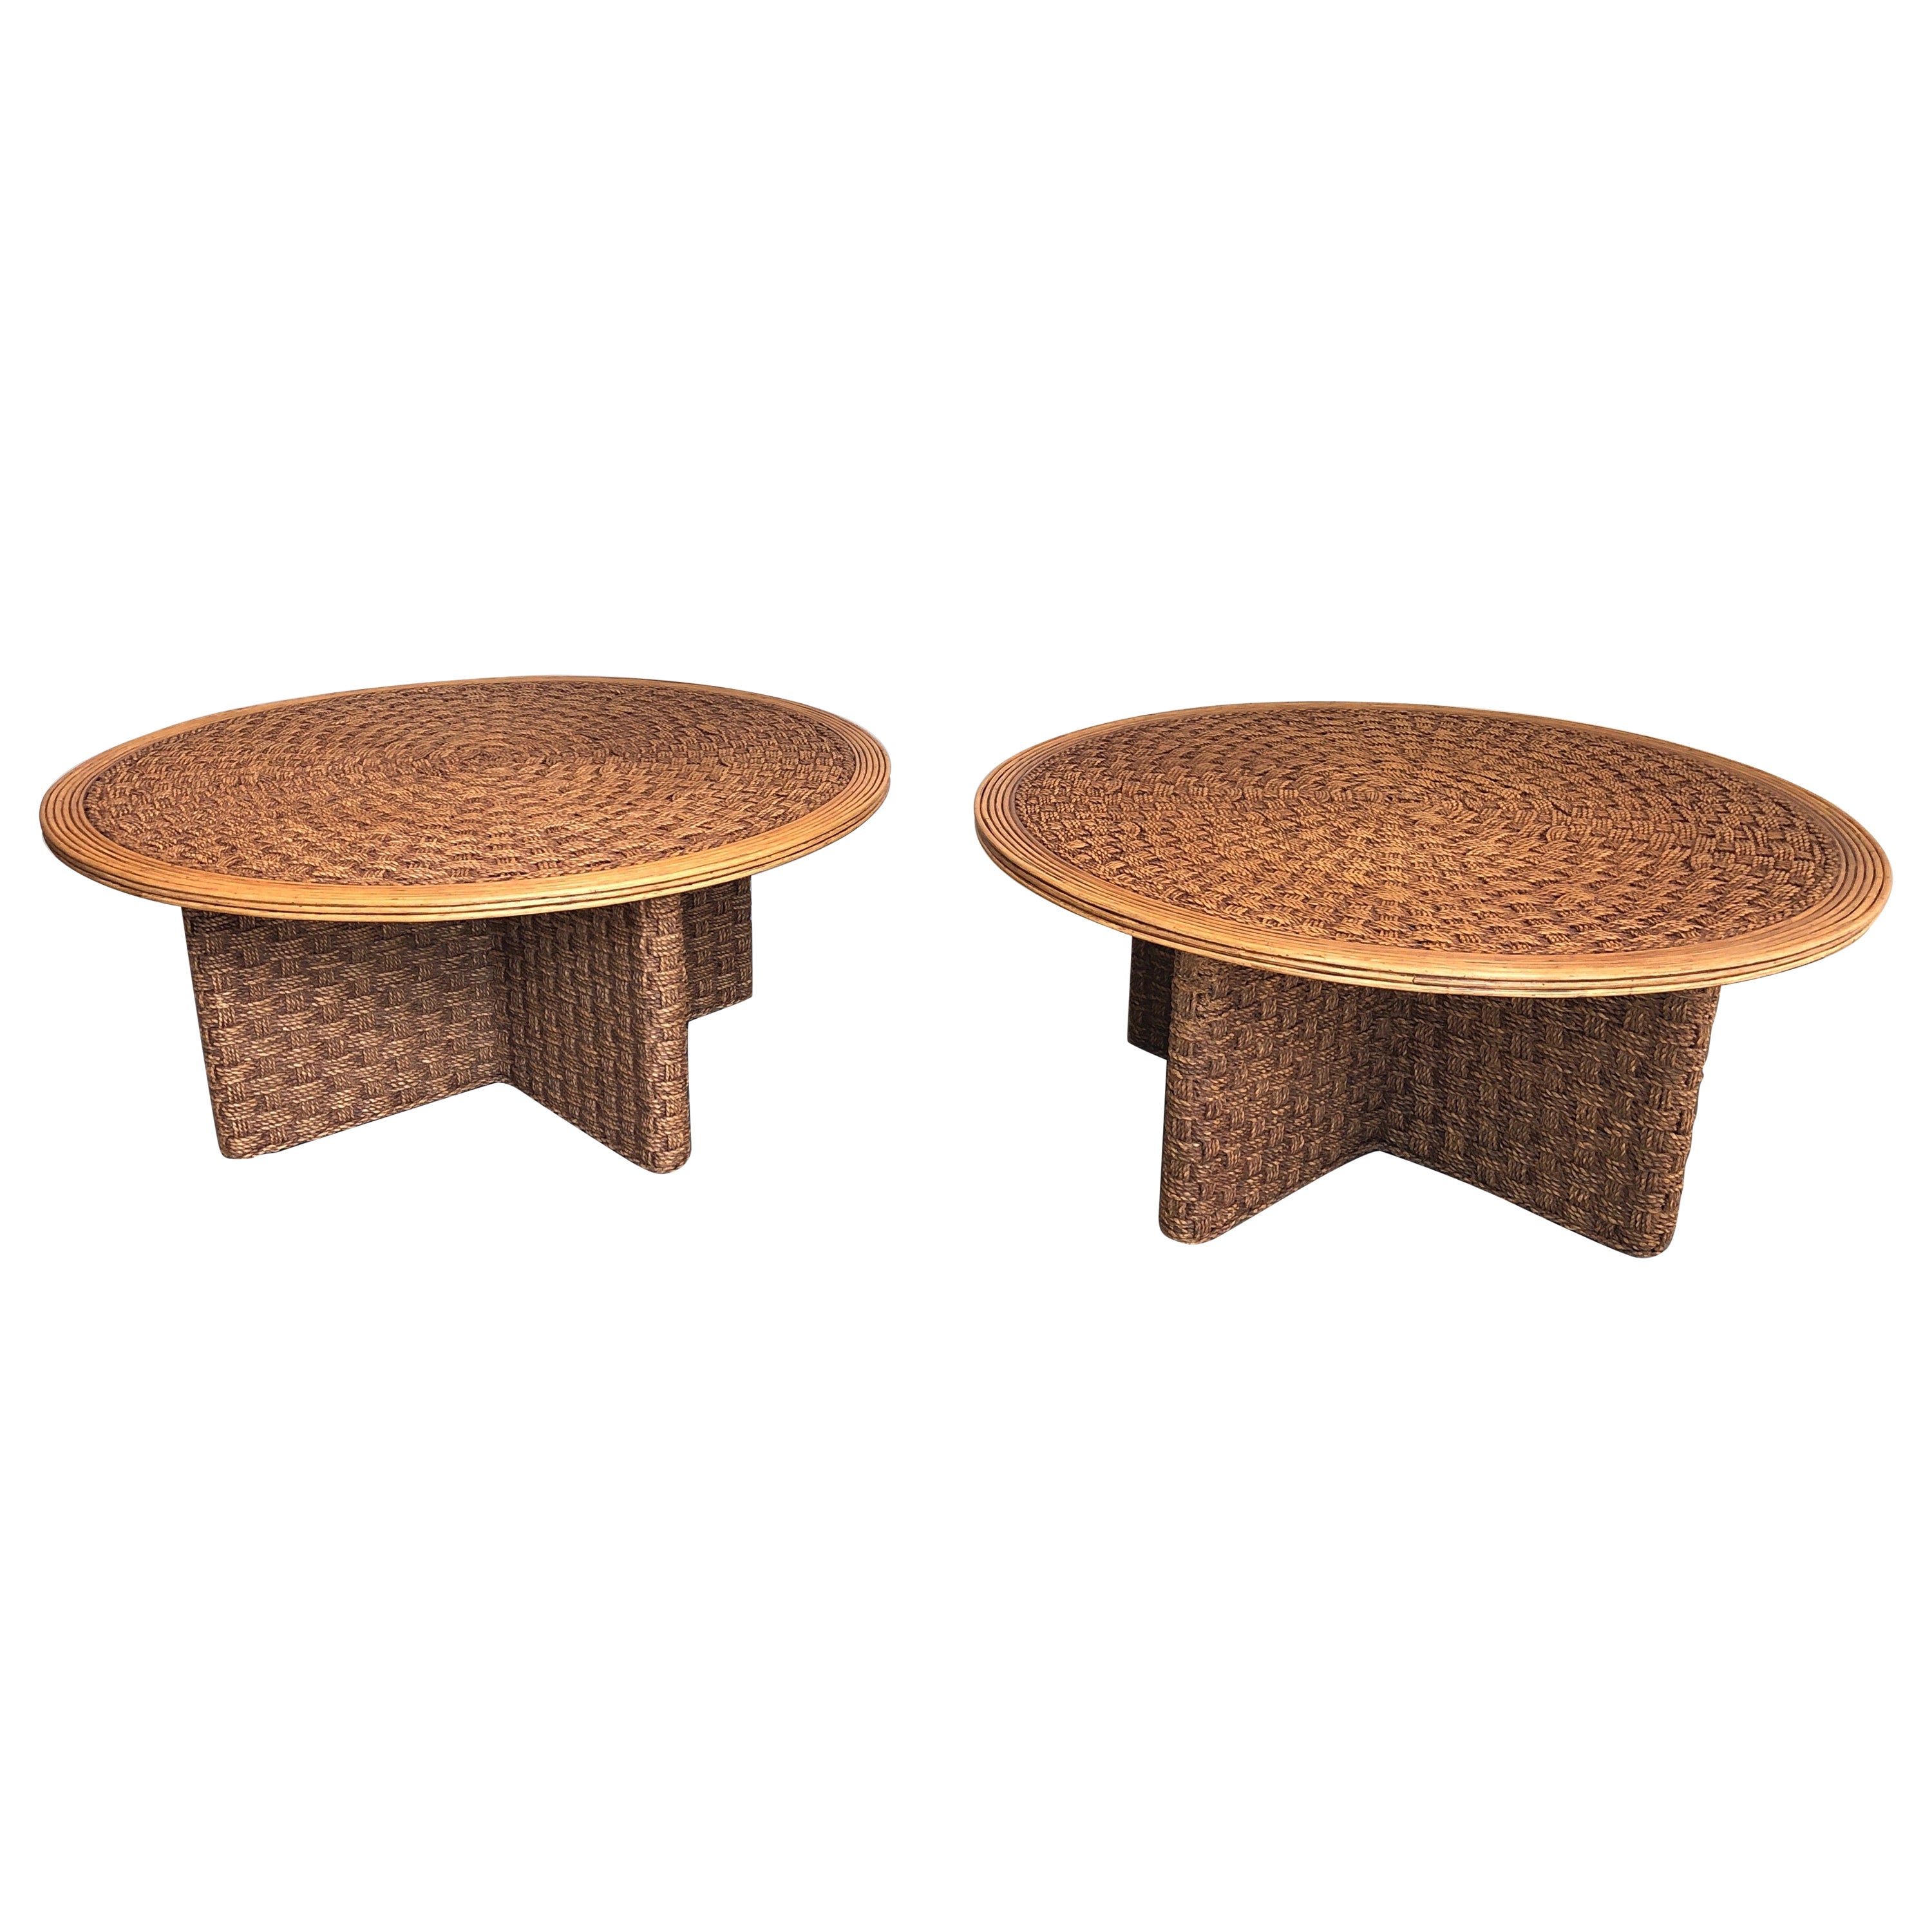 Rare Pair of Large Round Rope and Wood Coffee Table in the style of Audoux Minet